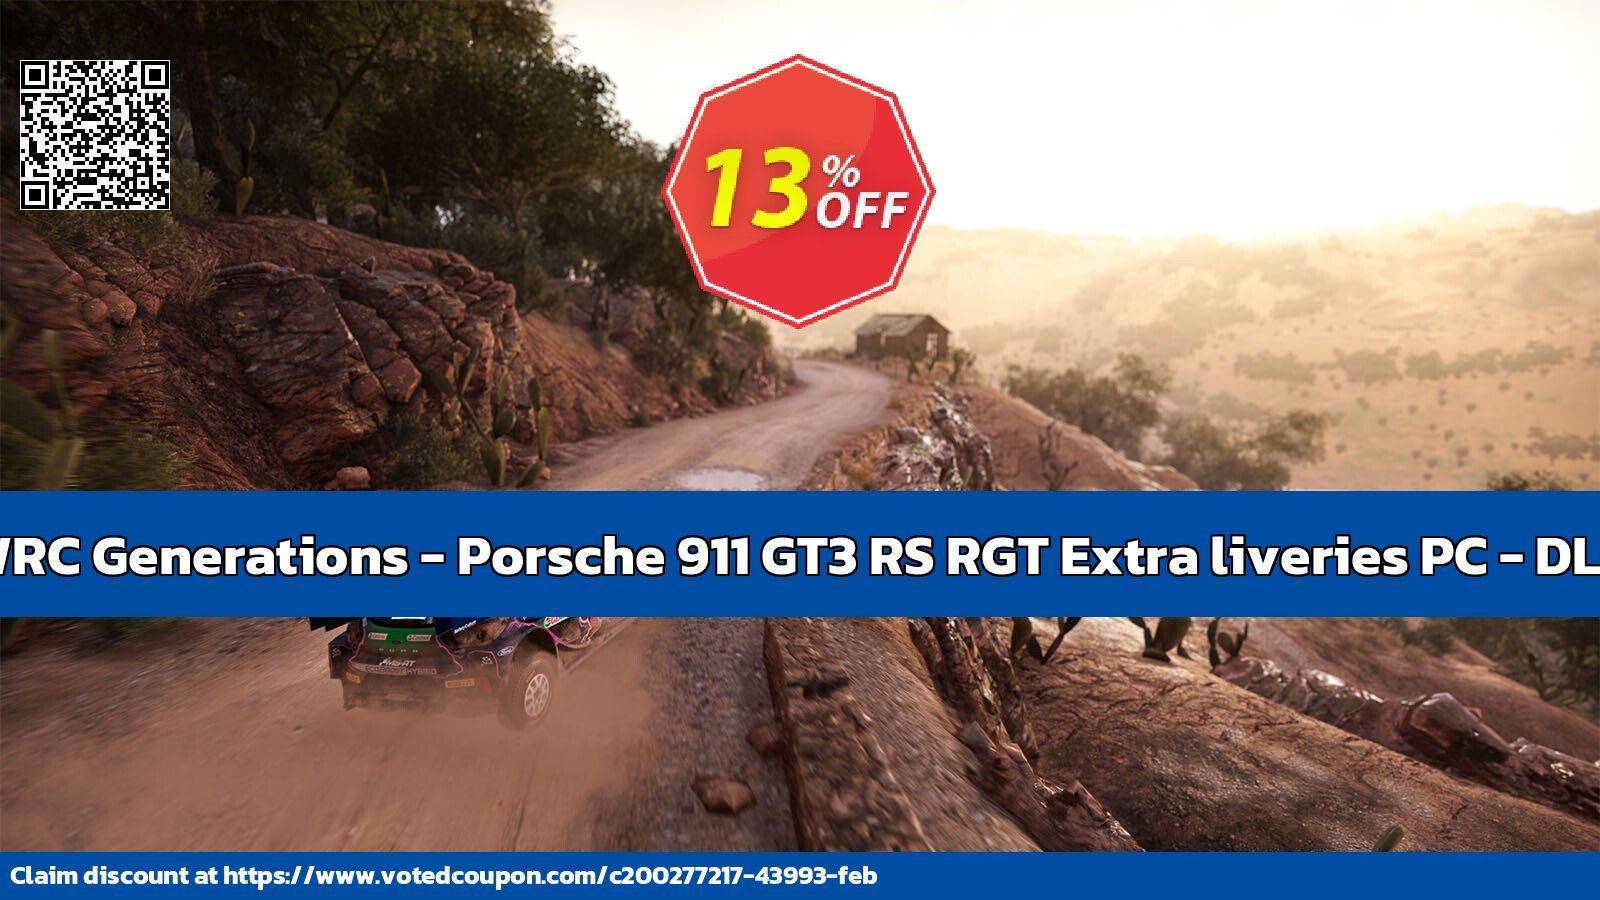 WRC Generations - Porsche 911 GT3 RS RGT Extra liveries PC - DLC Coupon Code May 2024, 21% OFF - VotedCoupon